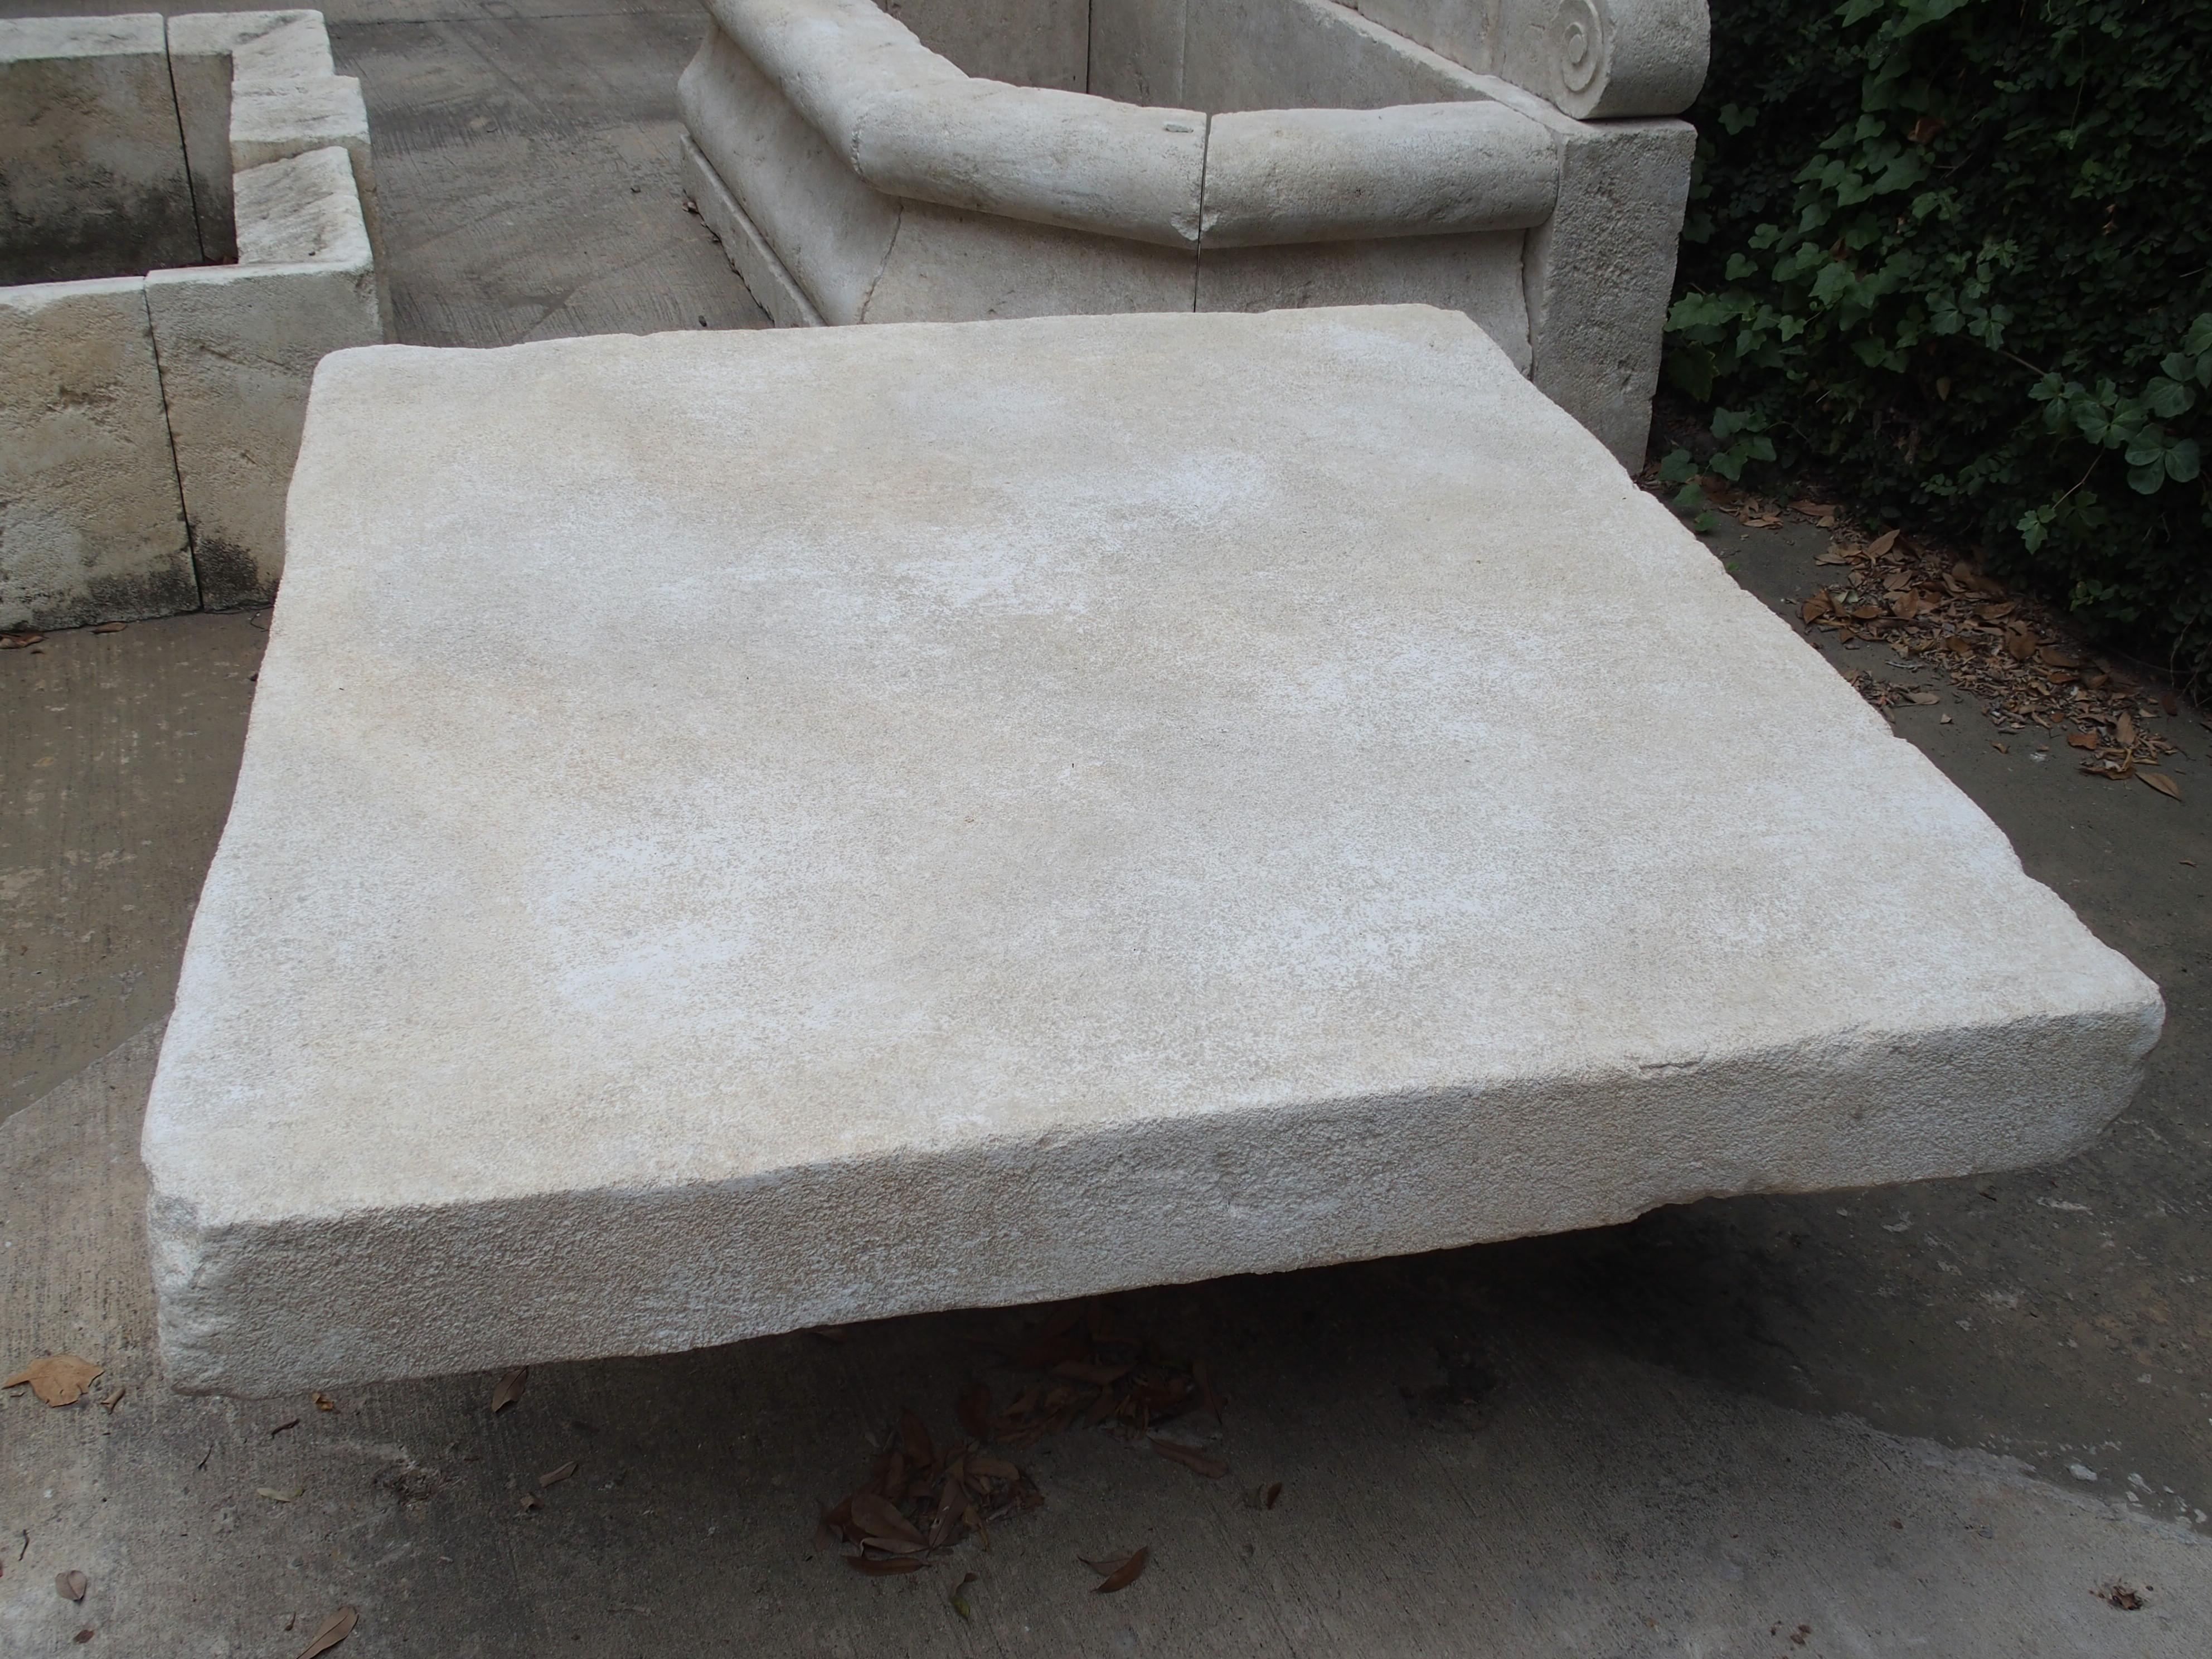 Hand-Carved Limestone Coffee Table from the South of France